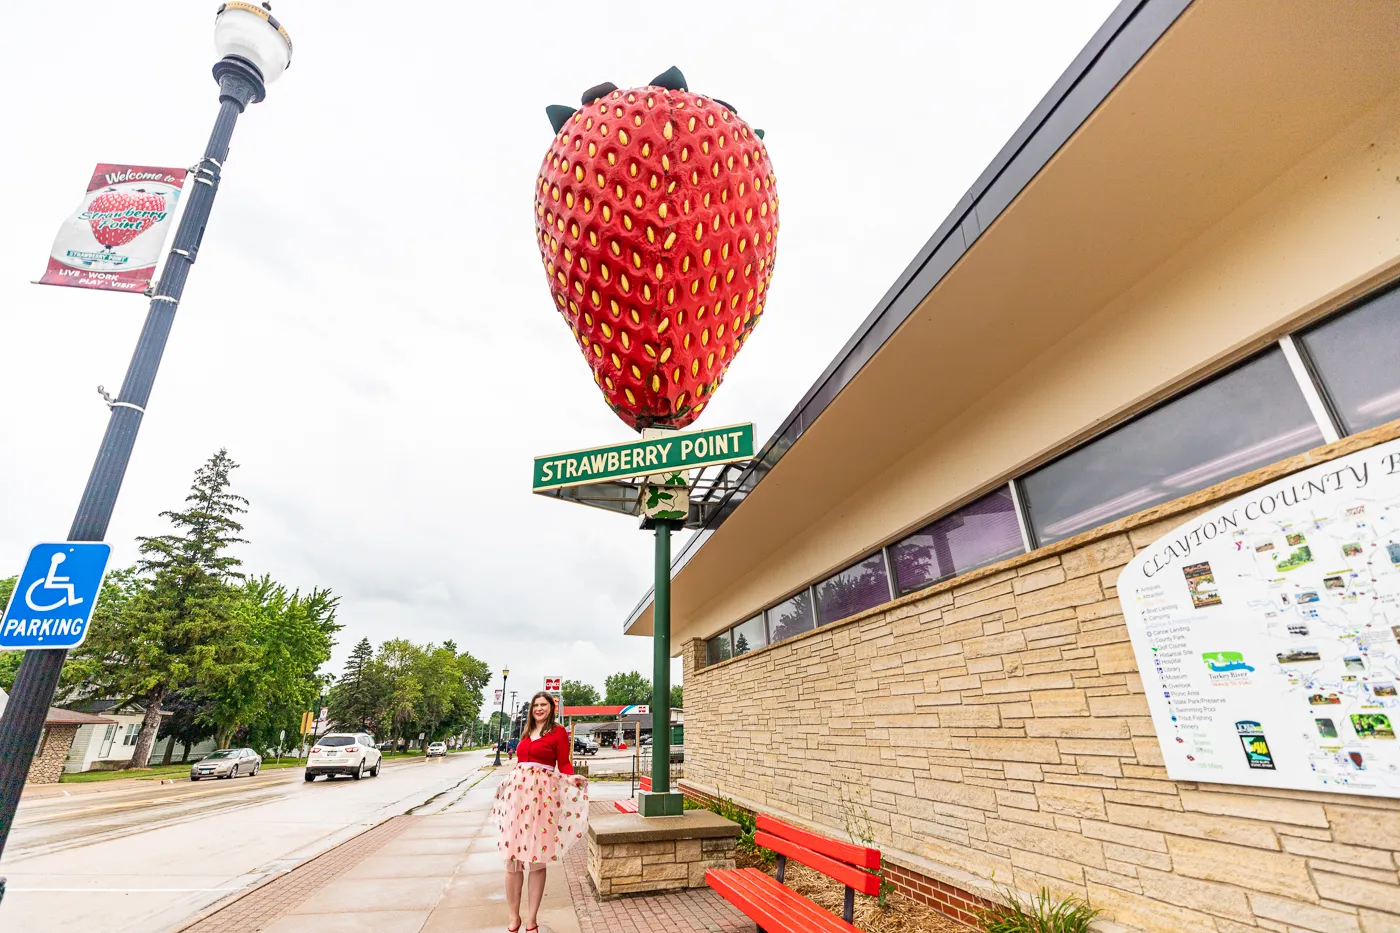 The World's Largest Strawberry in Strawberry Point, Iowa - The Best Iowa Roadside Attractions